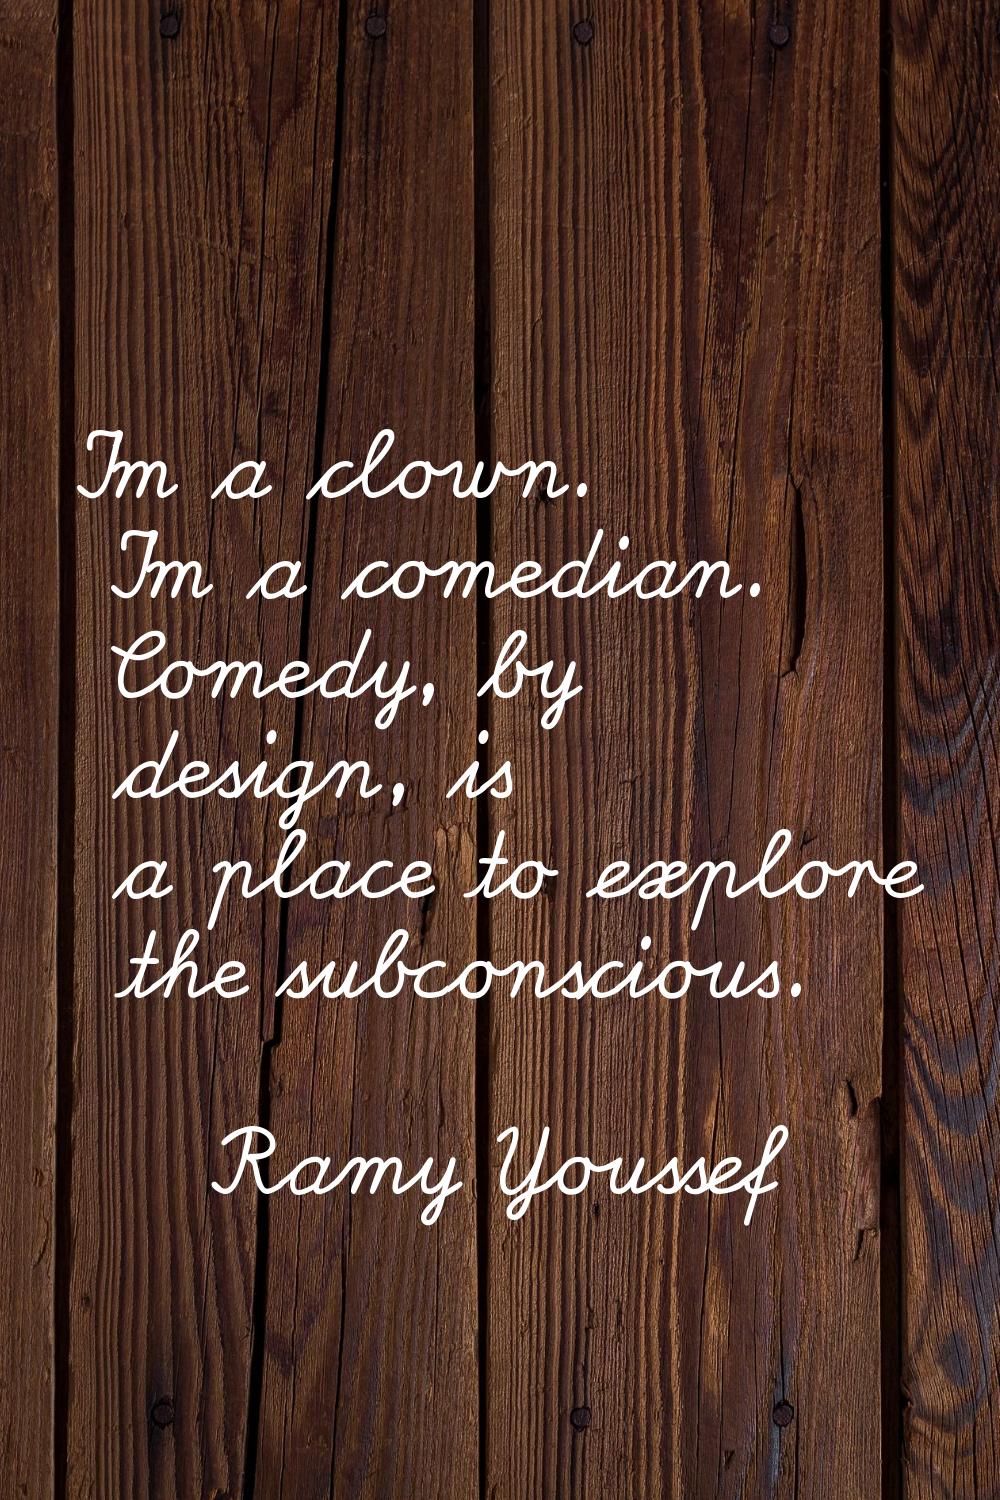 I'm a clown. I'm a comedian. Comedy, by design, is a place to explore the subconscious.